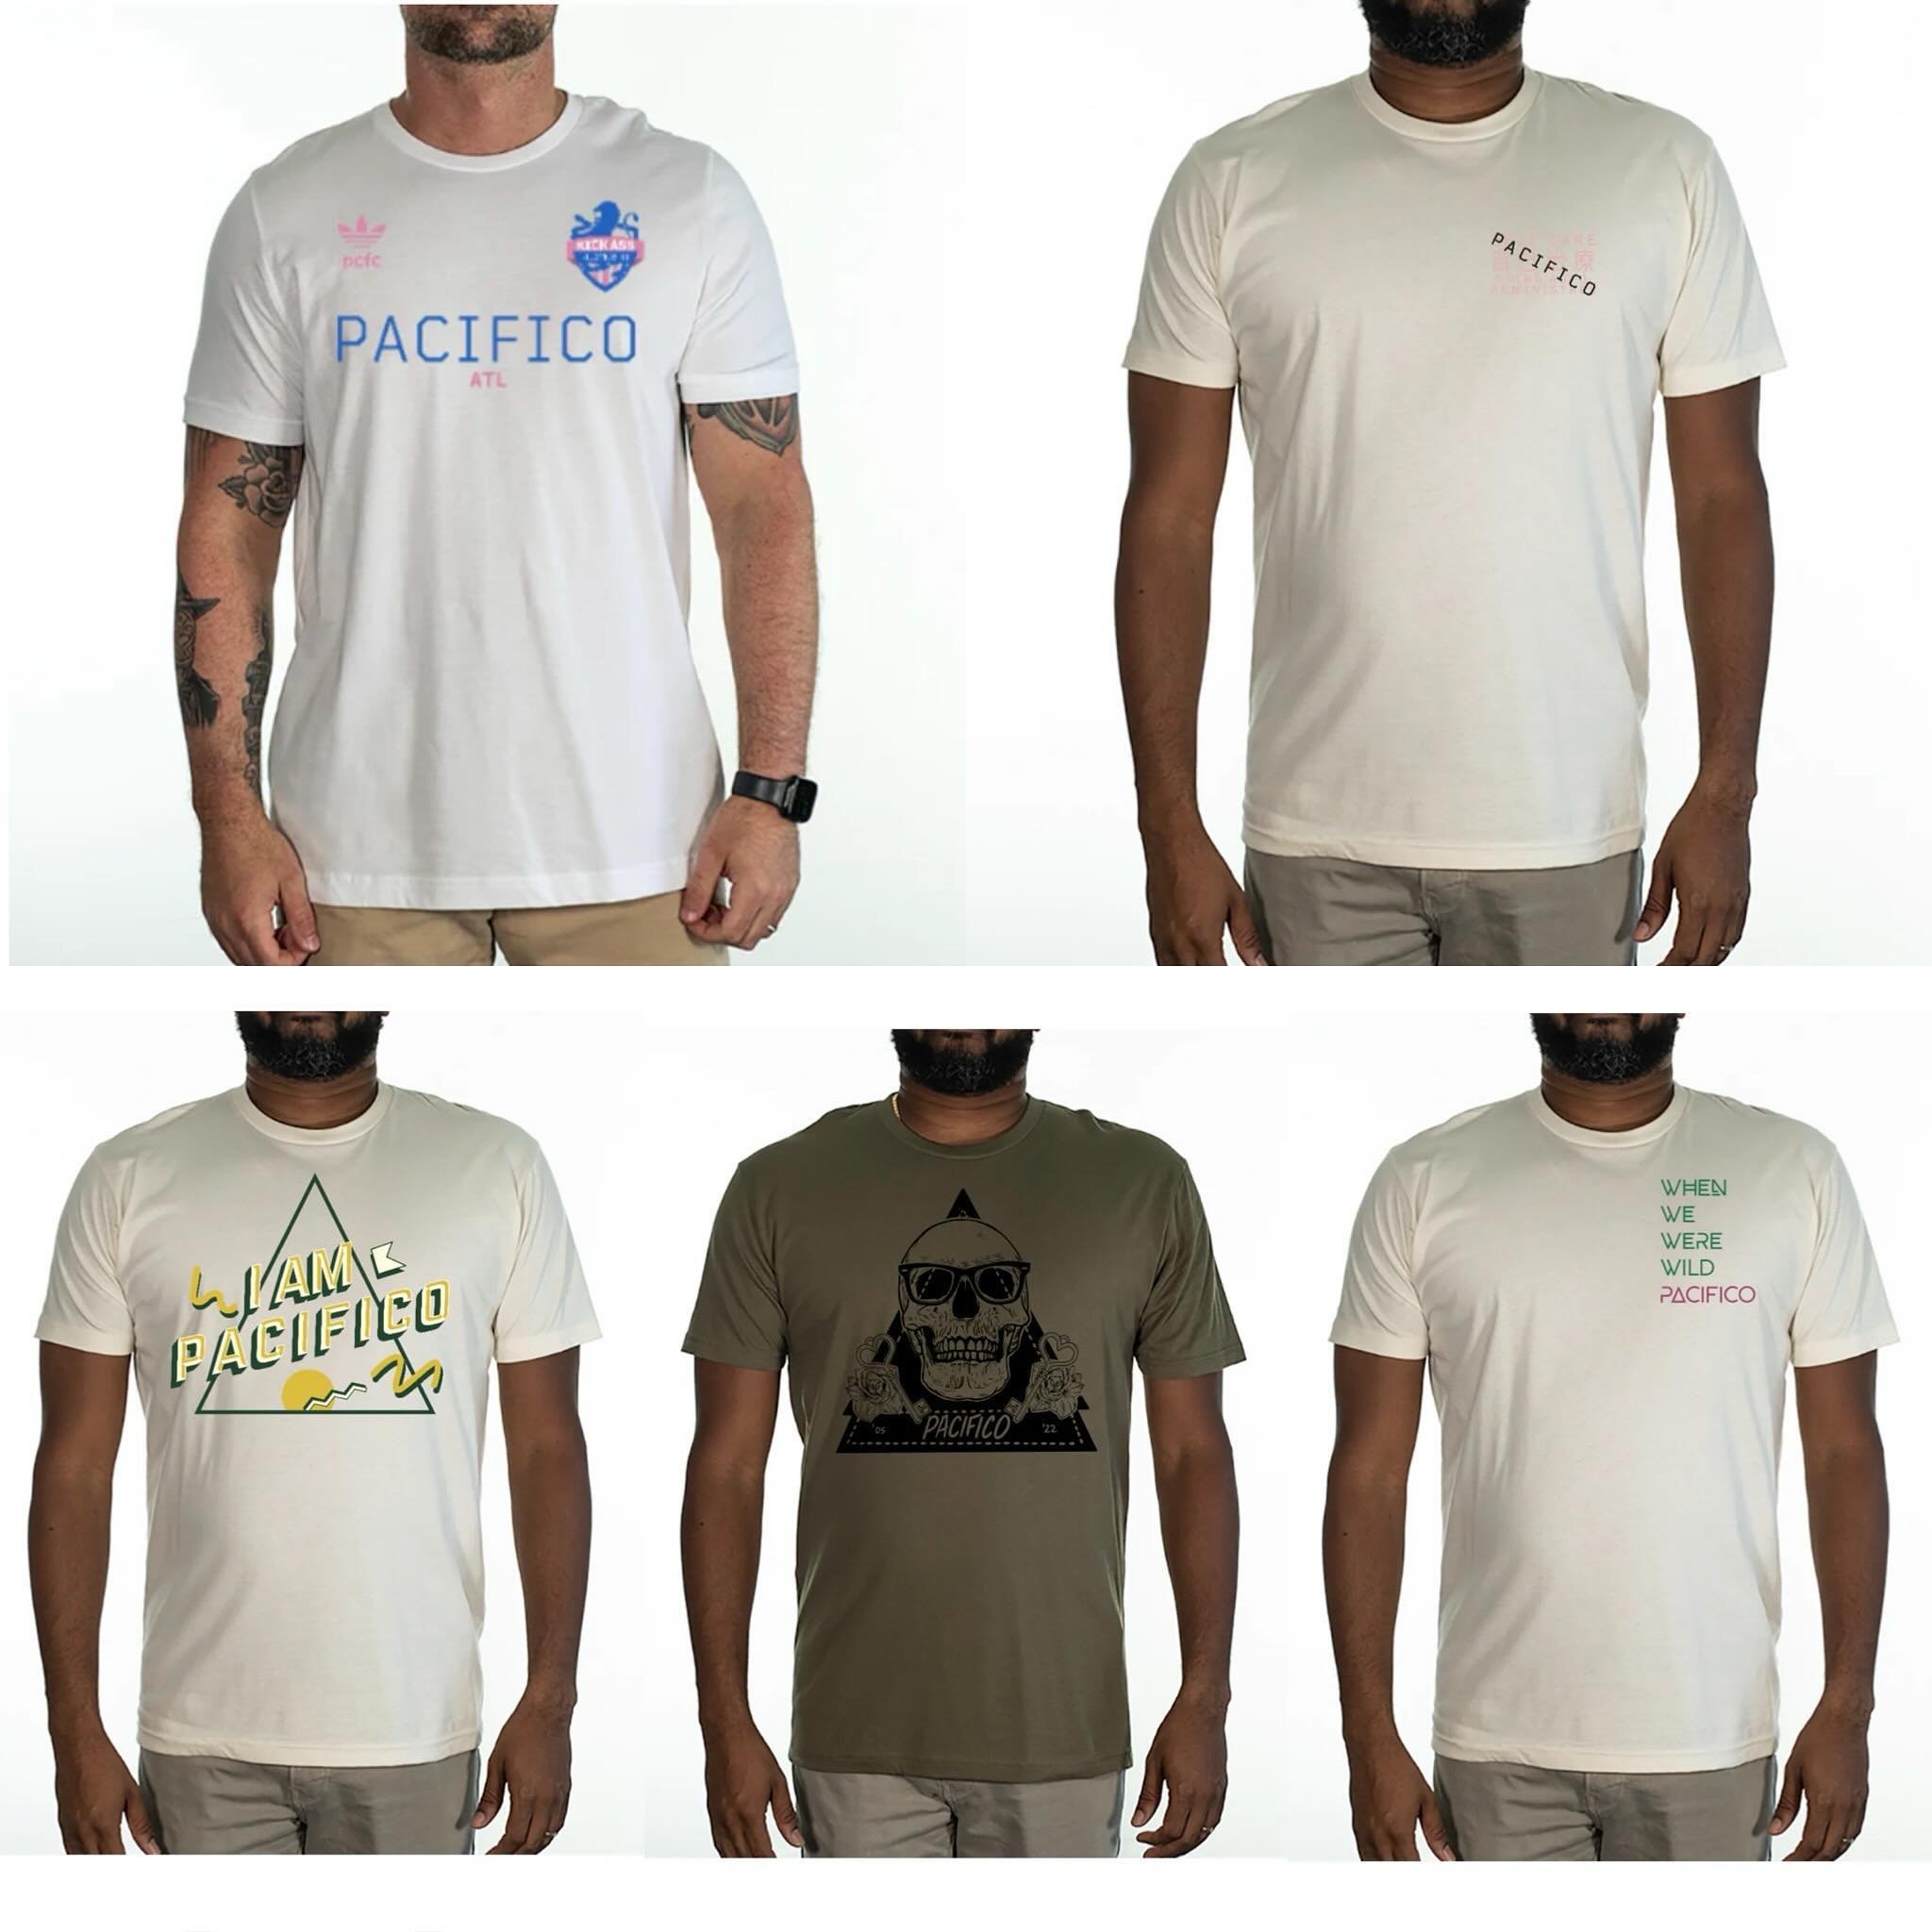 Do you have a Pacifico Tee, Sweatshirt, hoodie or other apparel?
Which design is your favorite?

Send us a photo of you in your favorite Pacifico tee and we will happily post it and tag you

If you don&rsquo;t have a tee but would like one - here are